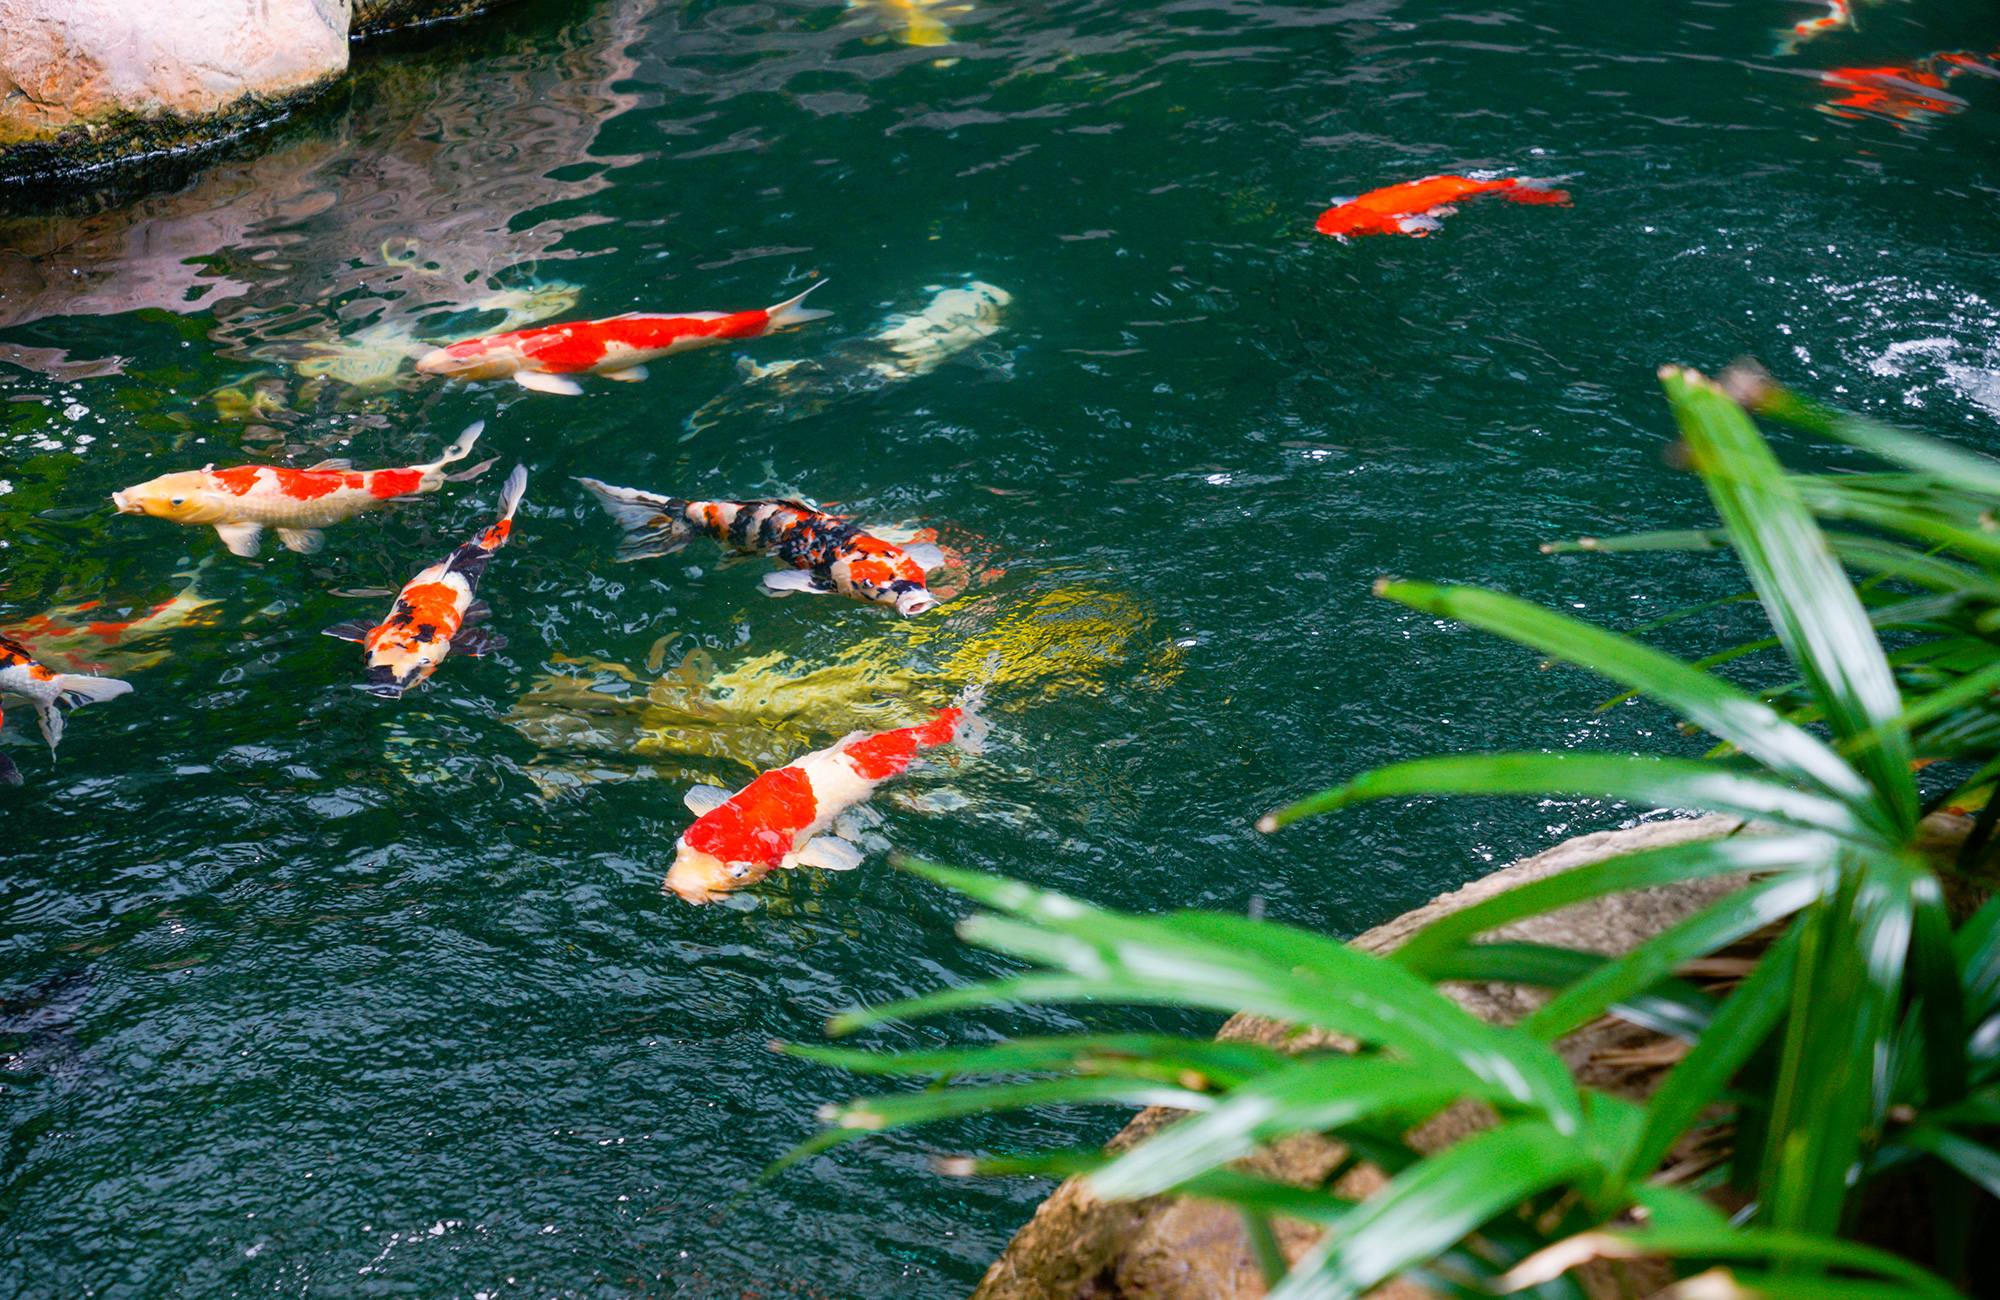 How much are koi fish?